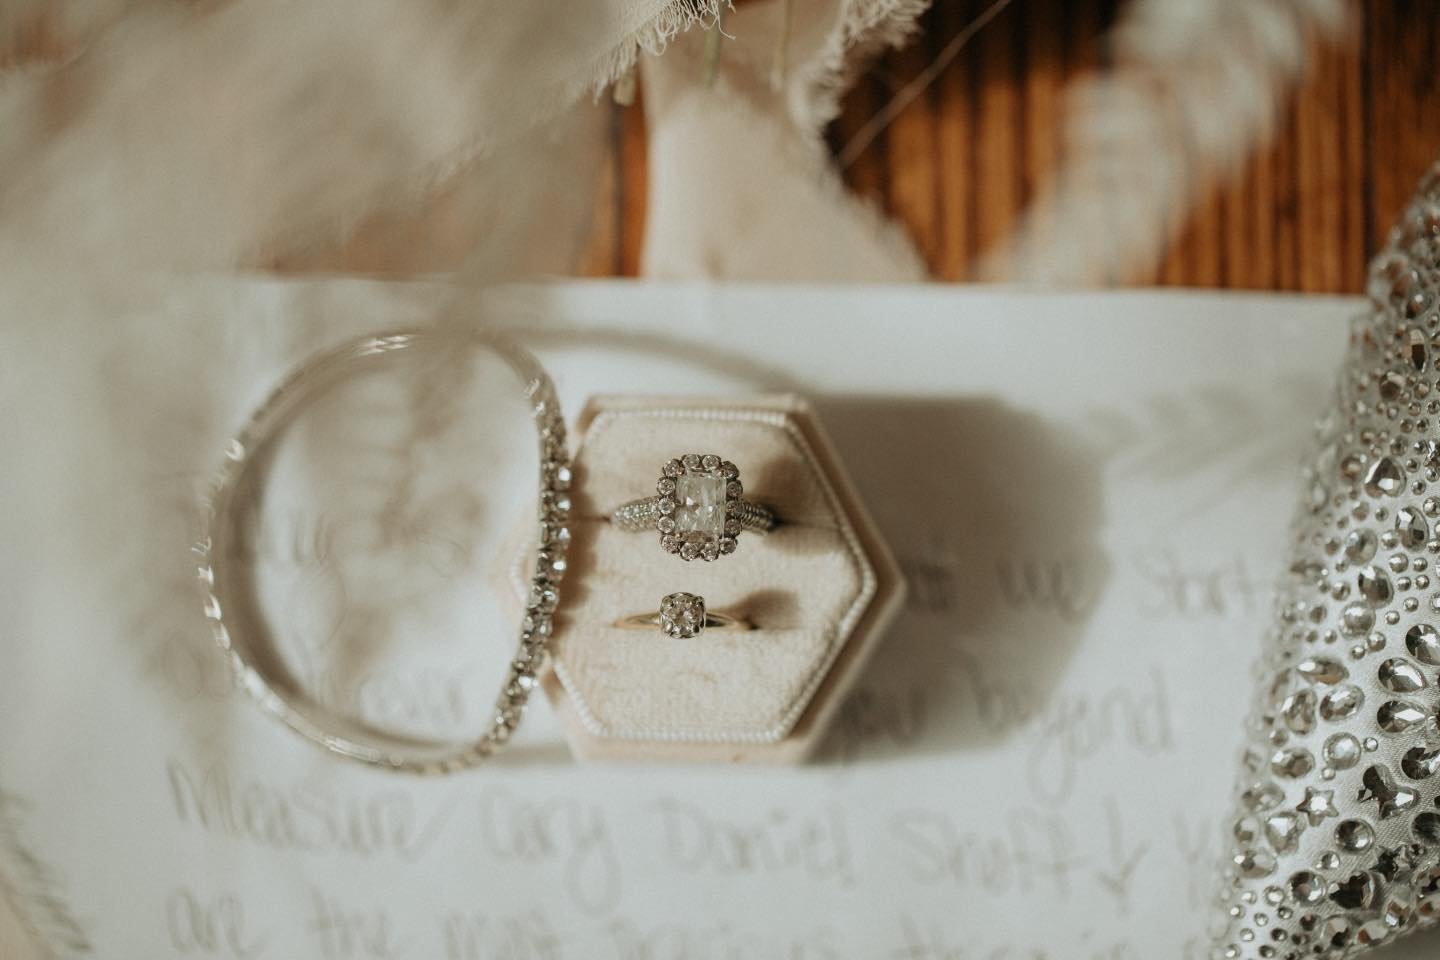 As beautiful as these details are, this couple&rsquo;s love for each other is even more stunning, and that&rsquo;s the real treasure.